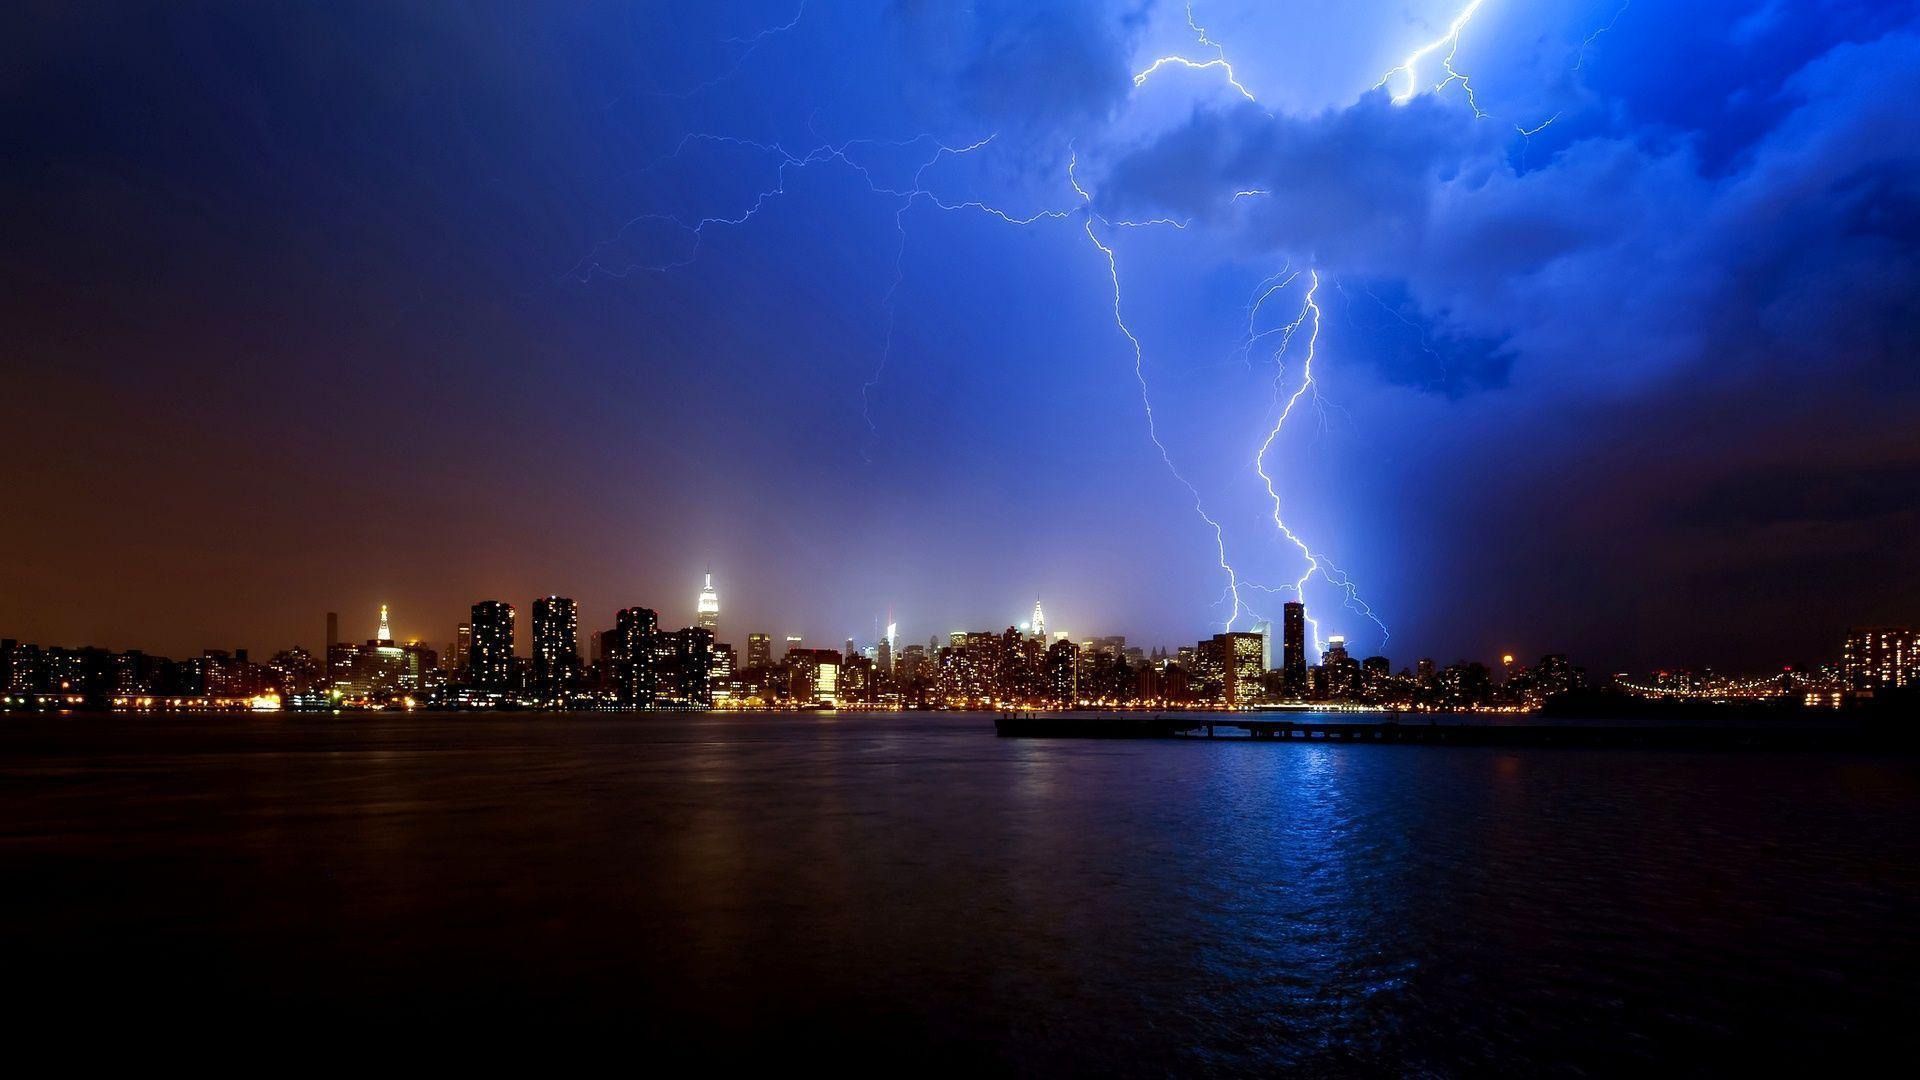 Thunder Fire HD Picture, Thunder Storm Wallpaper